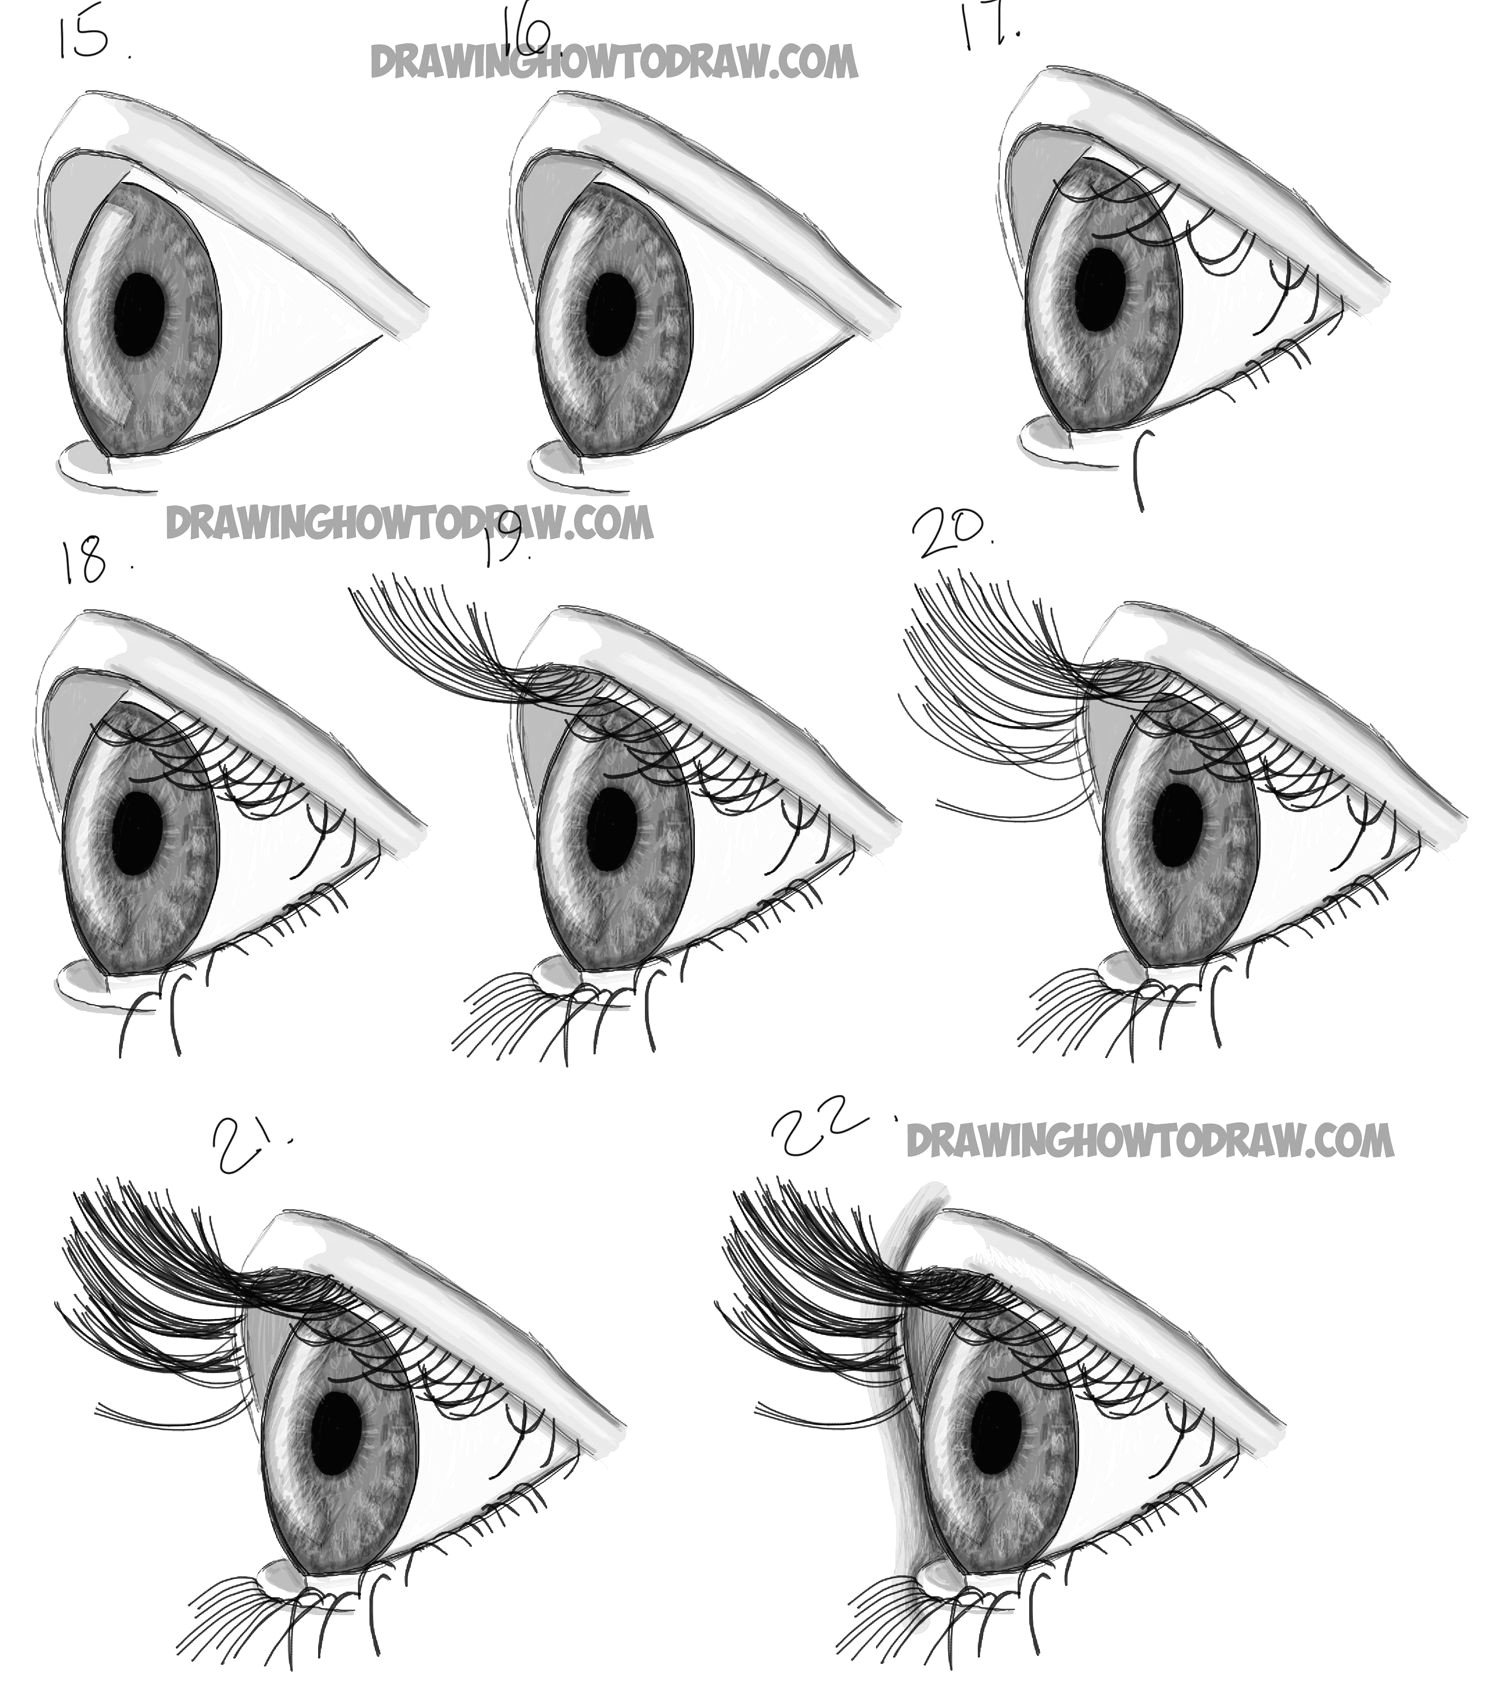 Drawings Of Eyes From the Side How to Draw Realistic Eyes From the Side Profile View Step by Step